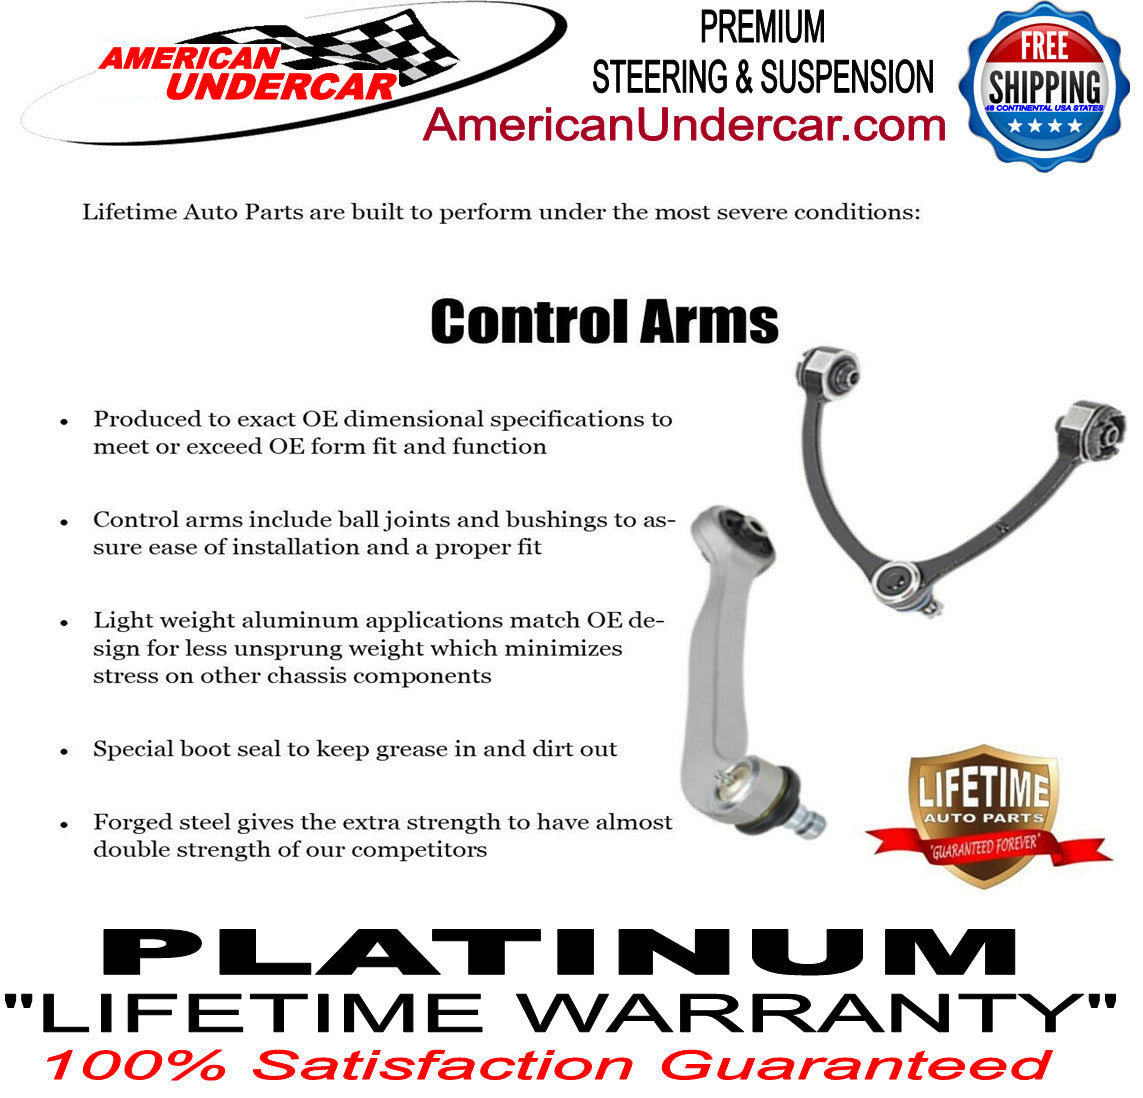 Lifetime Tie Rod Drag Link Ball Joint Kit for 1999-2004 Ford F450, F550 Super Duty